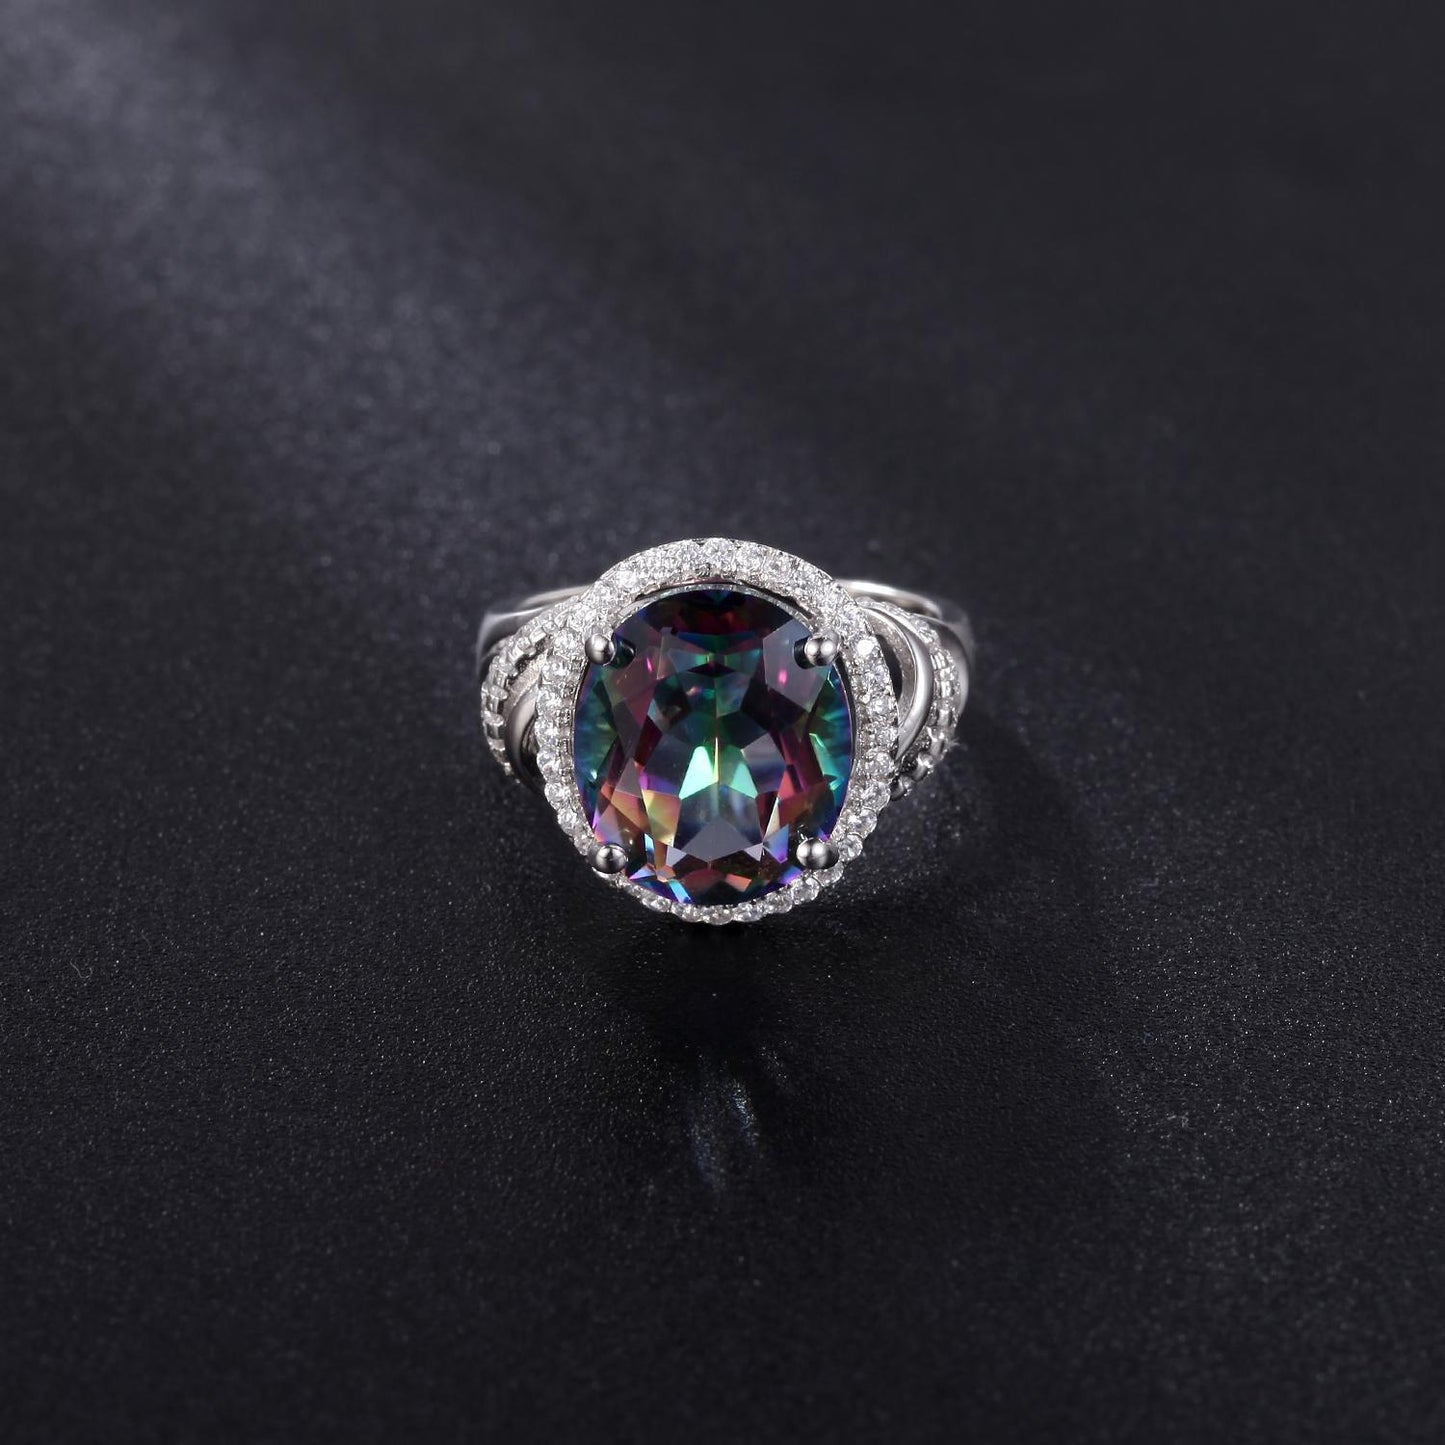 GEM&#39;S BALLET 4.36Ct 10x12mm Stunning Rainbow Mystic Topaz Birthstone Cocktail Rings in 925 Sterling Silver Gift For Her